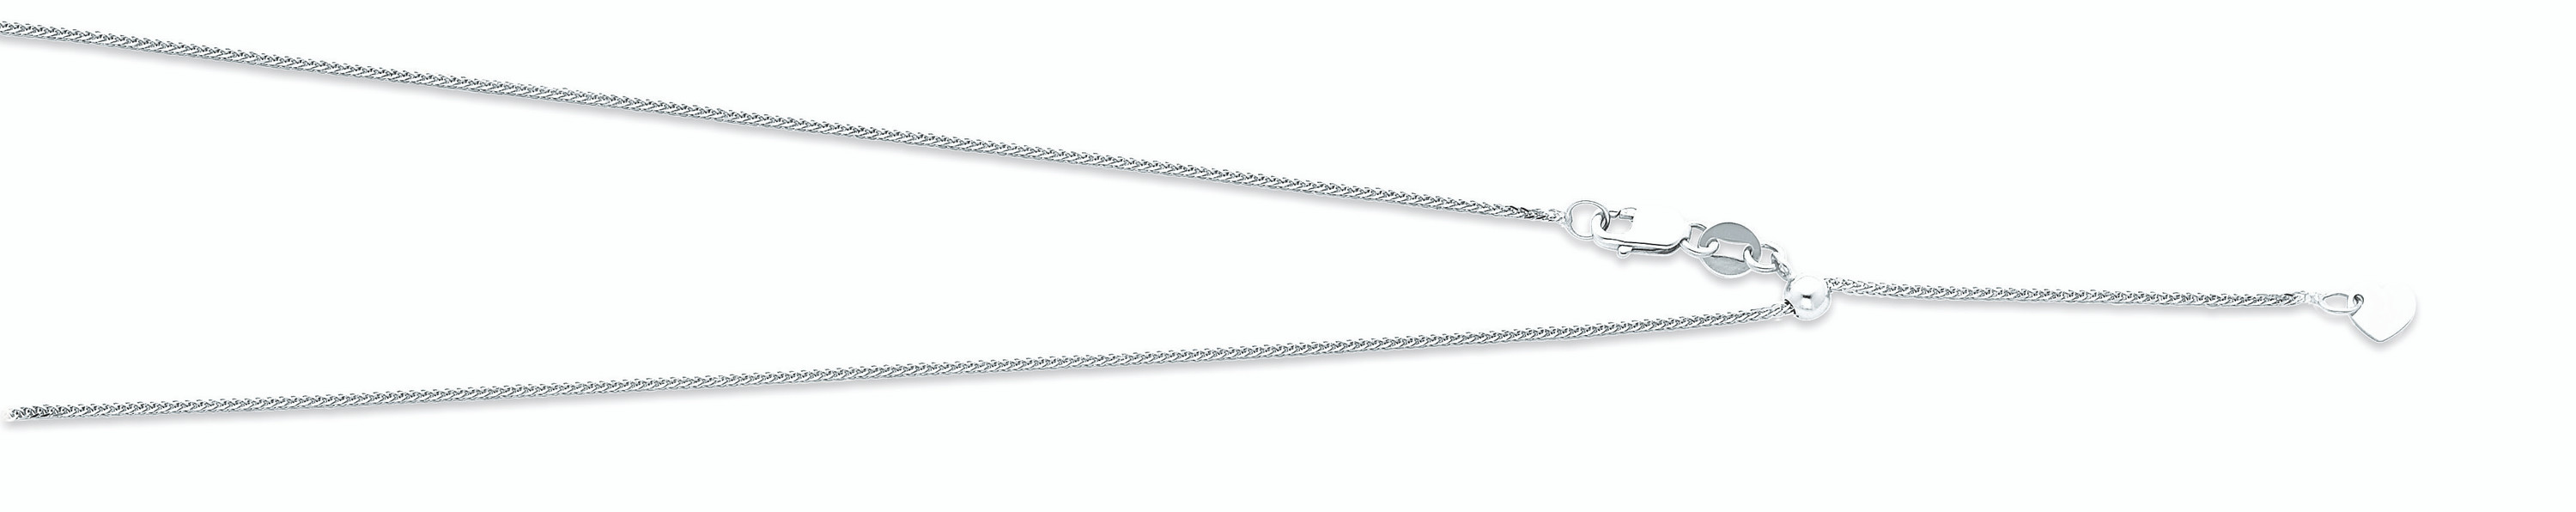 14K White Gold 0.8mm Square Wheat Link Length Adjustable Chain